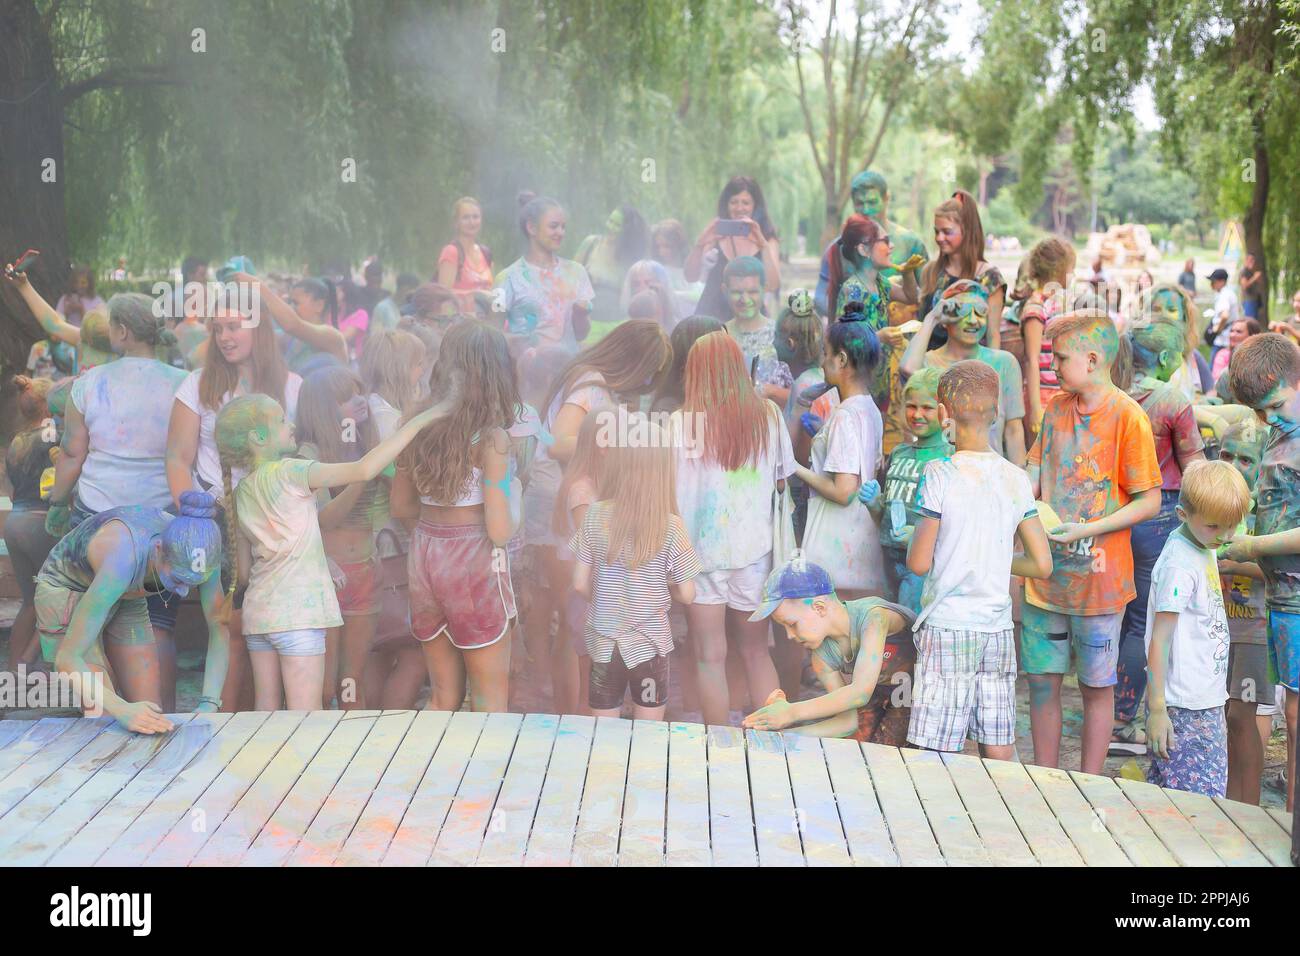 Lviv, Ukraine - July 18, 2021: Color Holi Festival, a crowd of people adults and small children throw colorful paint. Indian holiday, children running on a wooden stage, poor visibility due to paint dust. Stock Photo